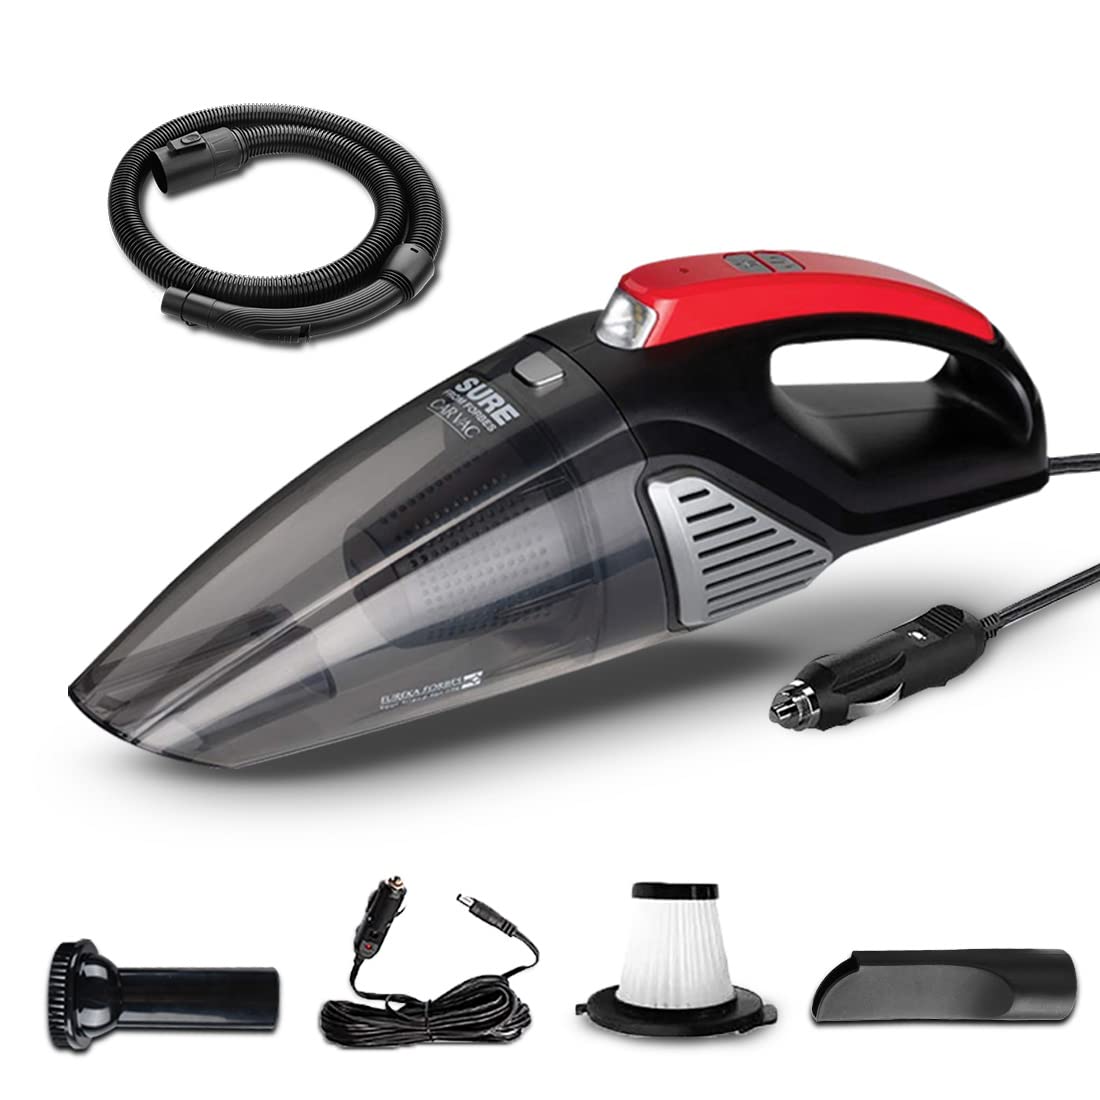 car Vac 100 Watts Powerful Suction Vacuum Cleaner with Washable HEPA Filter, 3 Accessories,Compact,Light Weight & Easy to use (Black and Red)